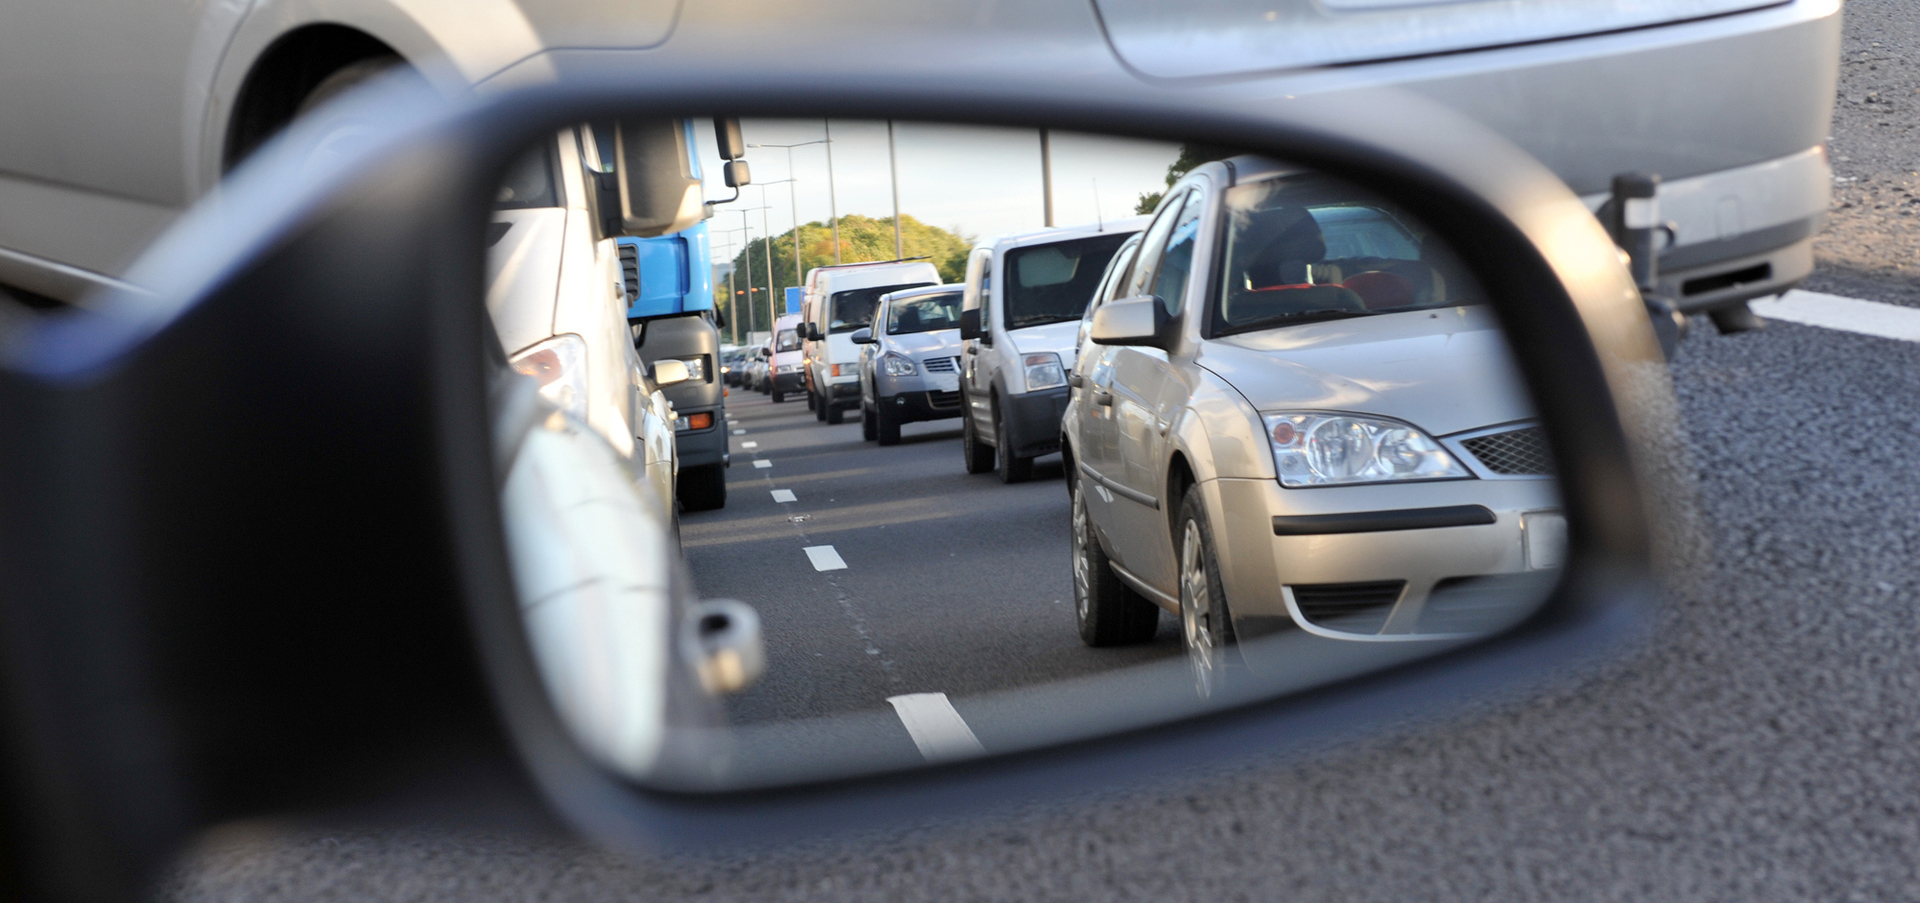 Looking through a car's wing mirror at a long queue of traffic